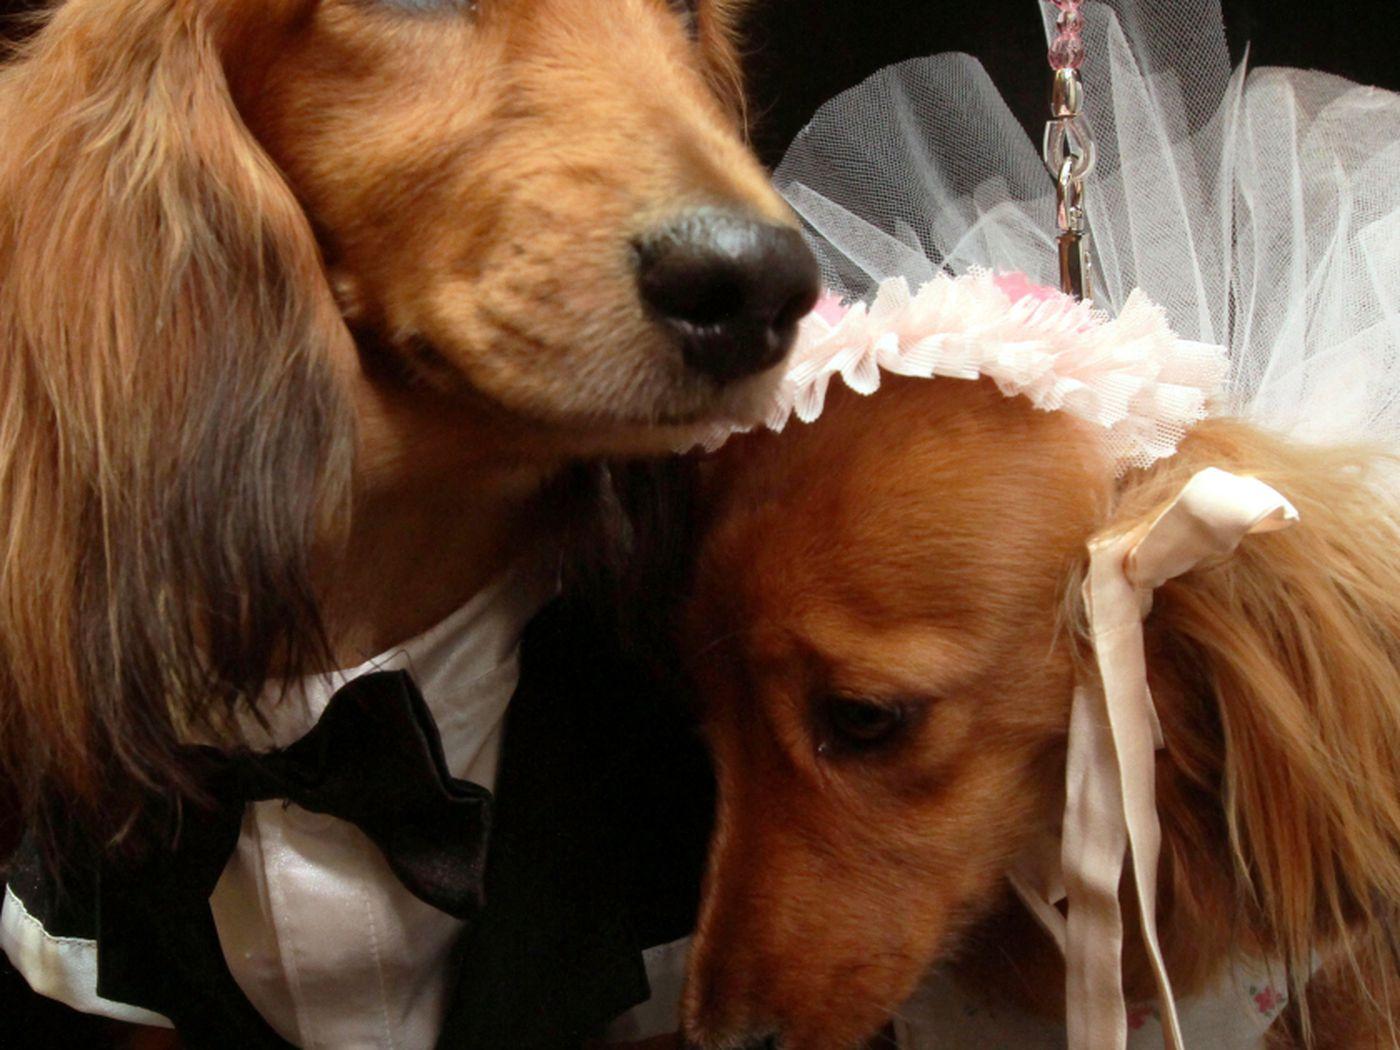 A woman is marrying her dog on Valentine's Day